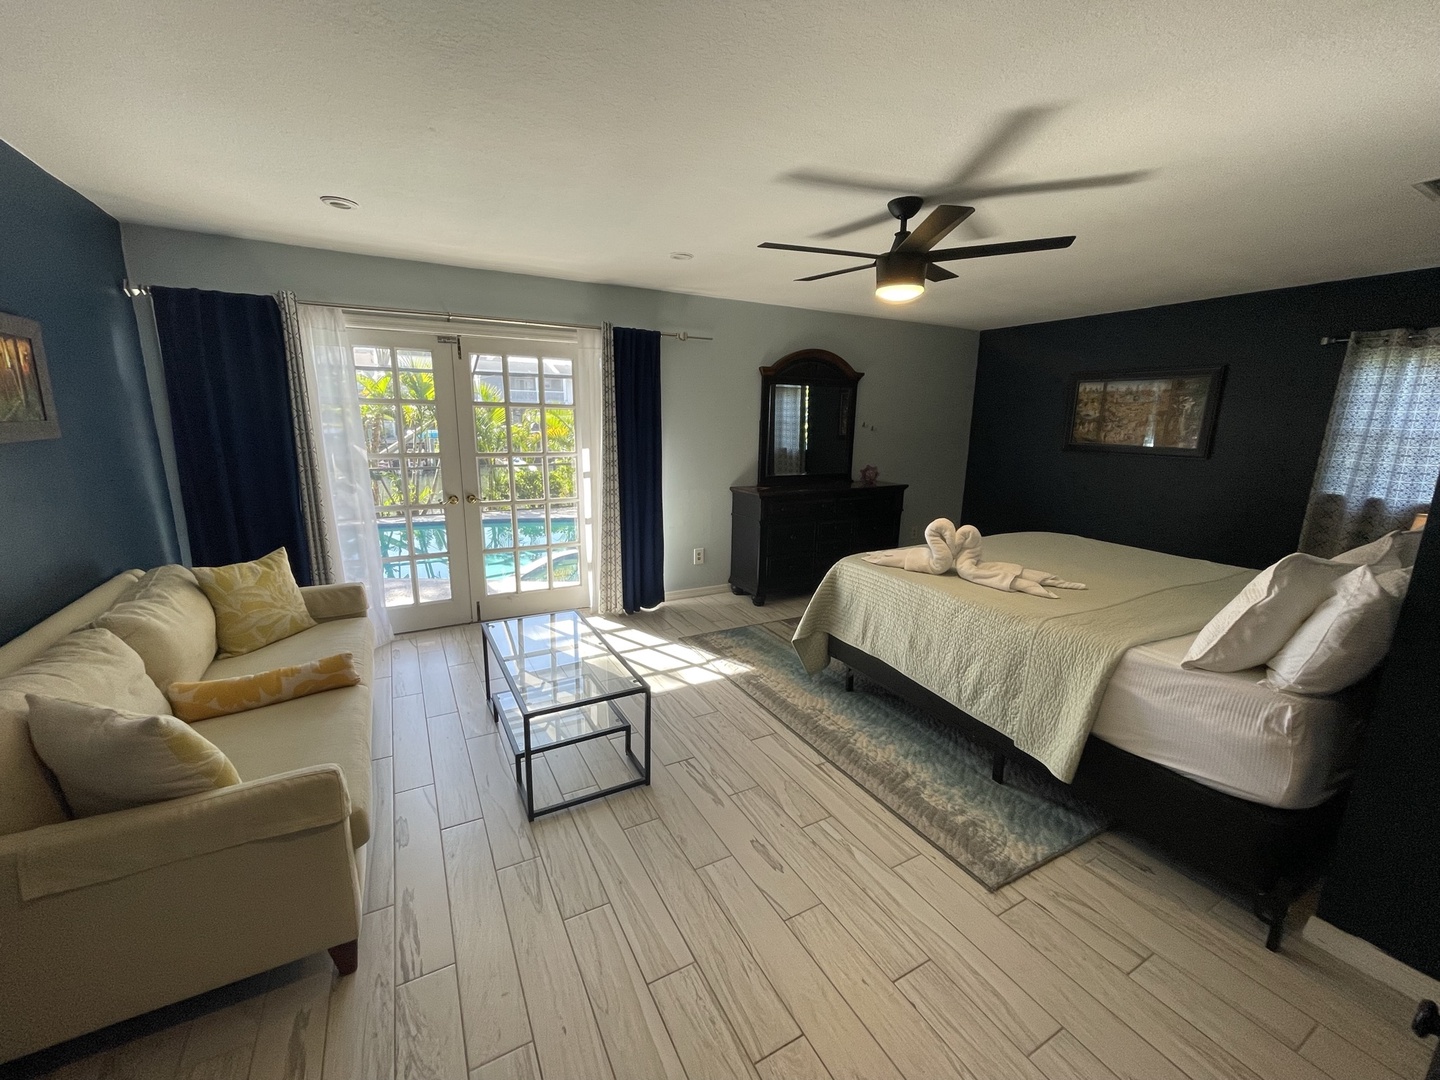 The king suite boasts a loveseat, private ensuite, & patio access